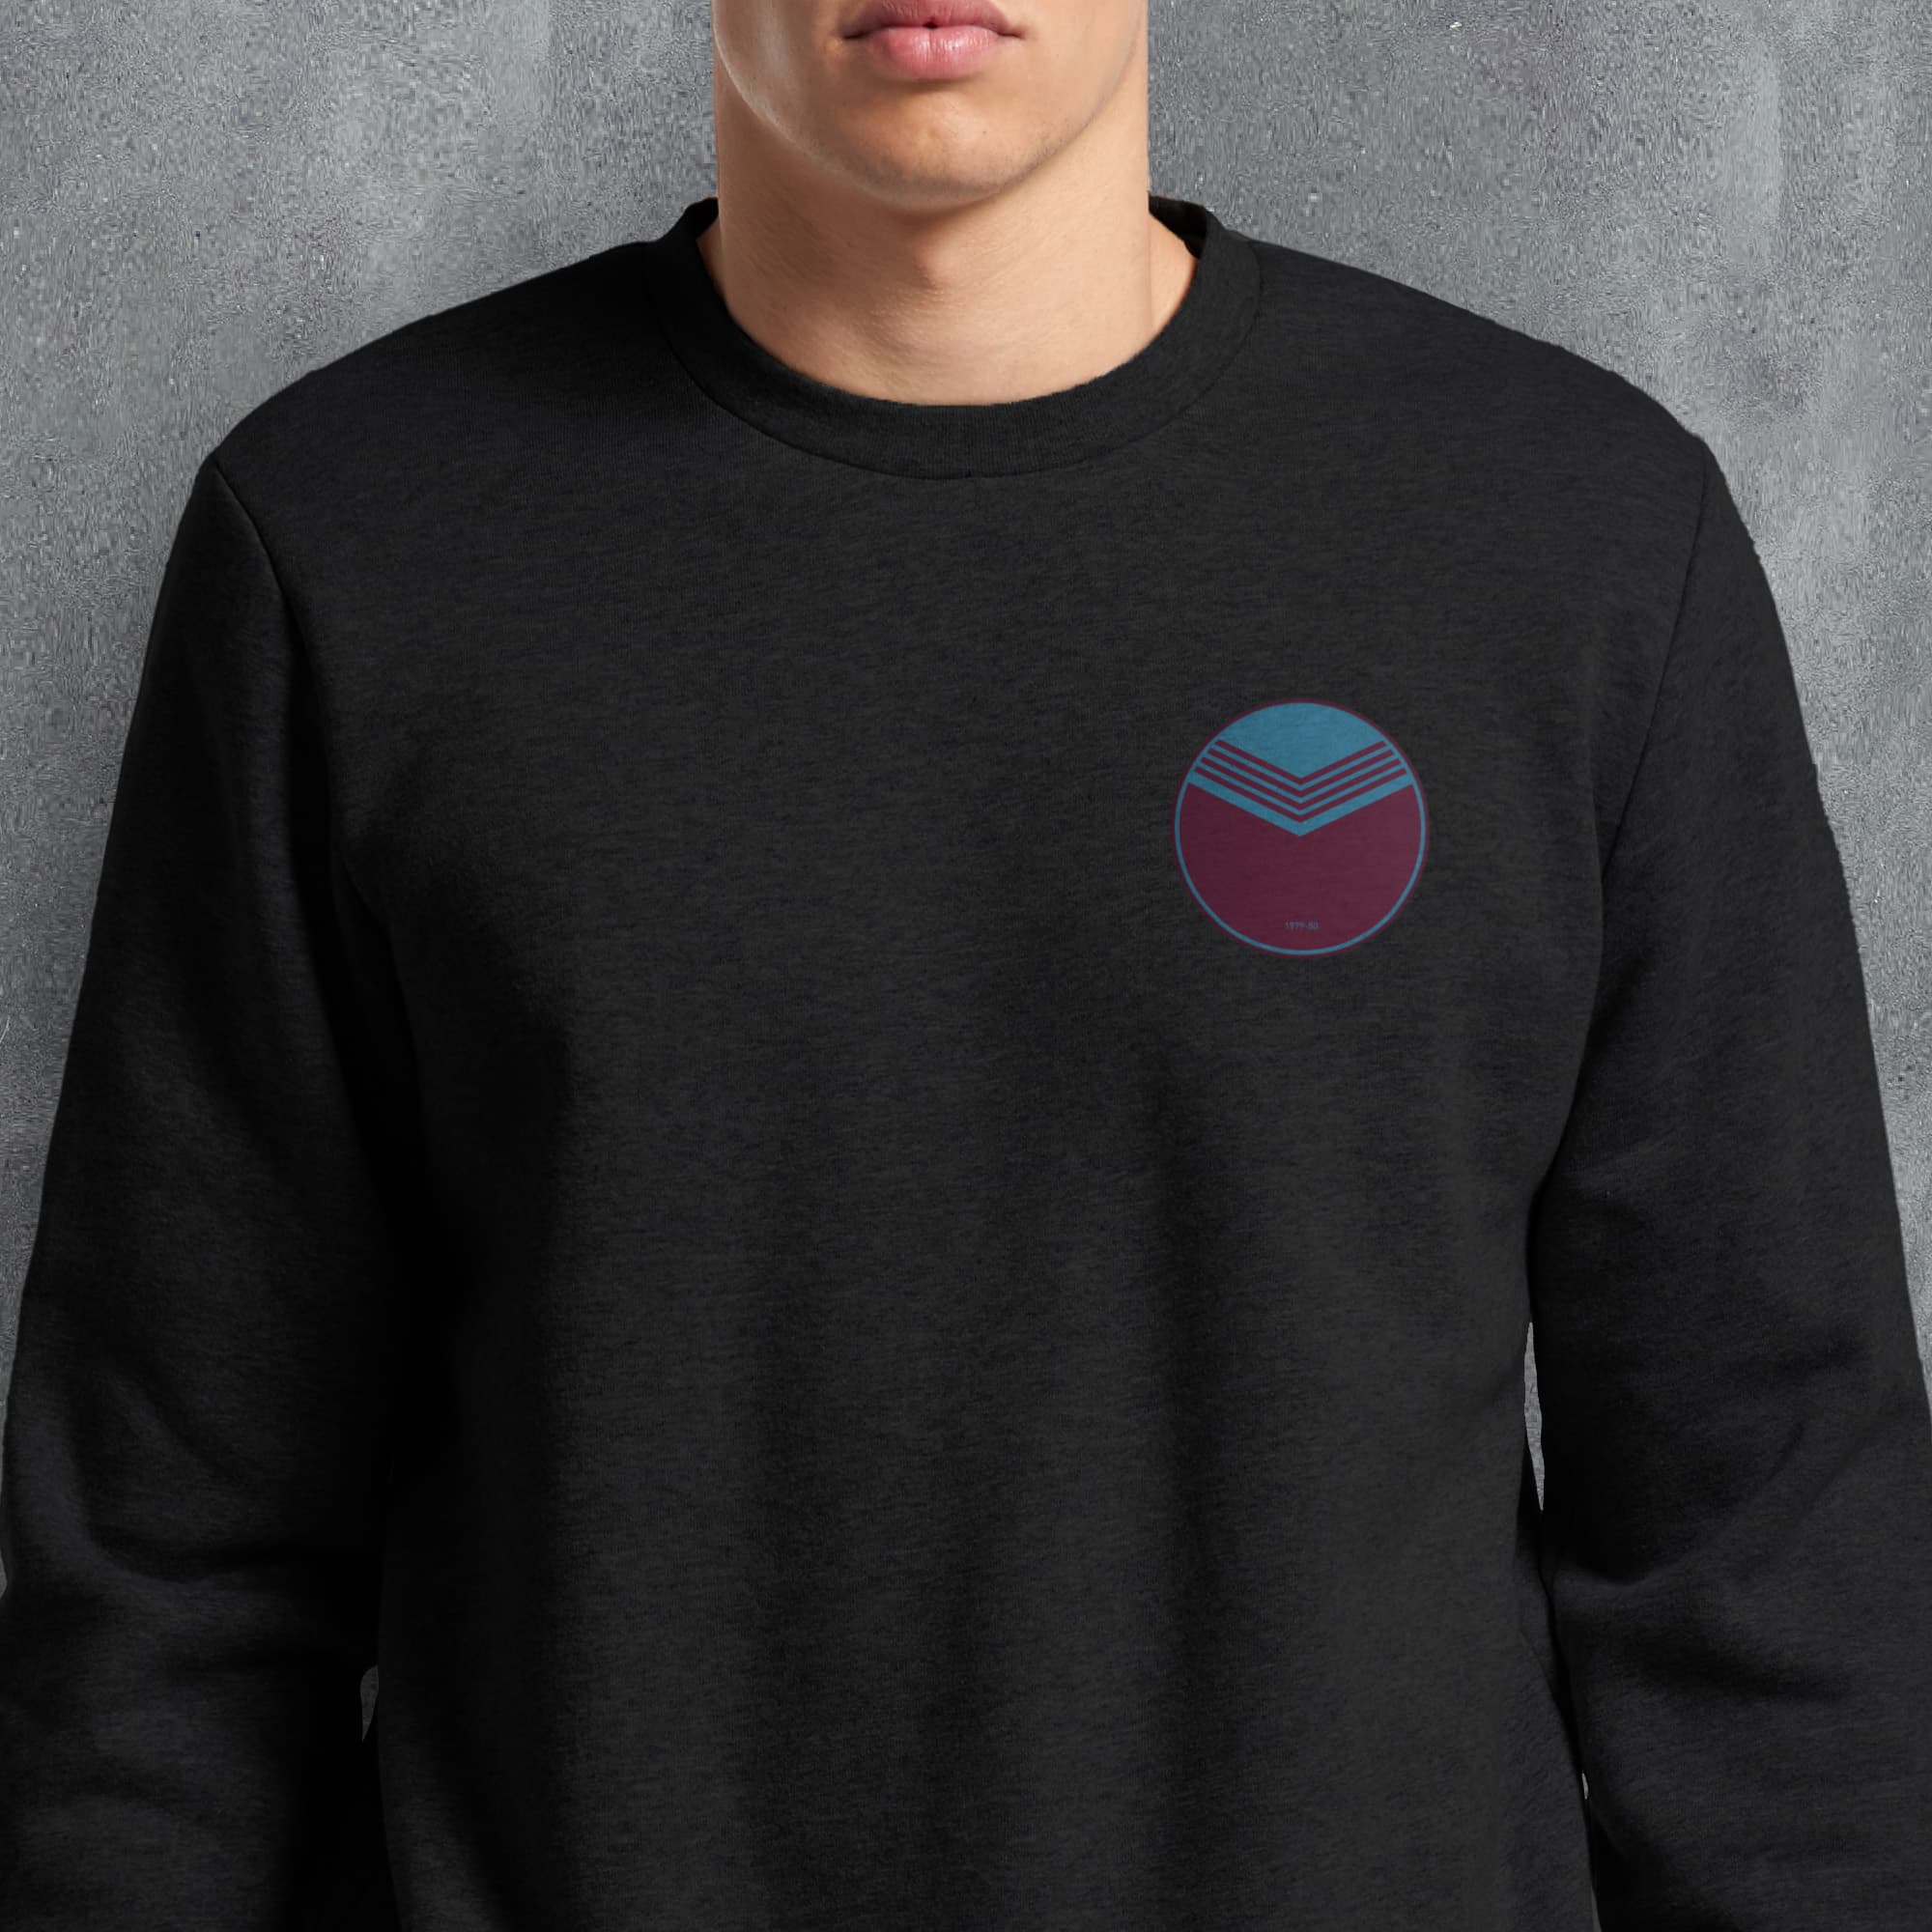 a man wearing a black sweatshirt with a blue and red circle on it